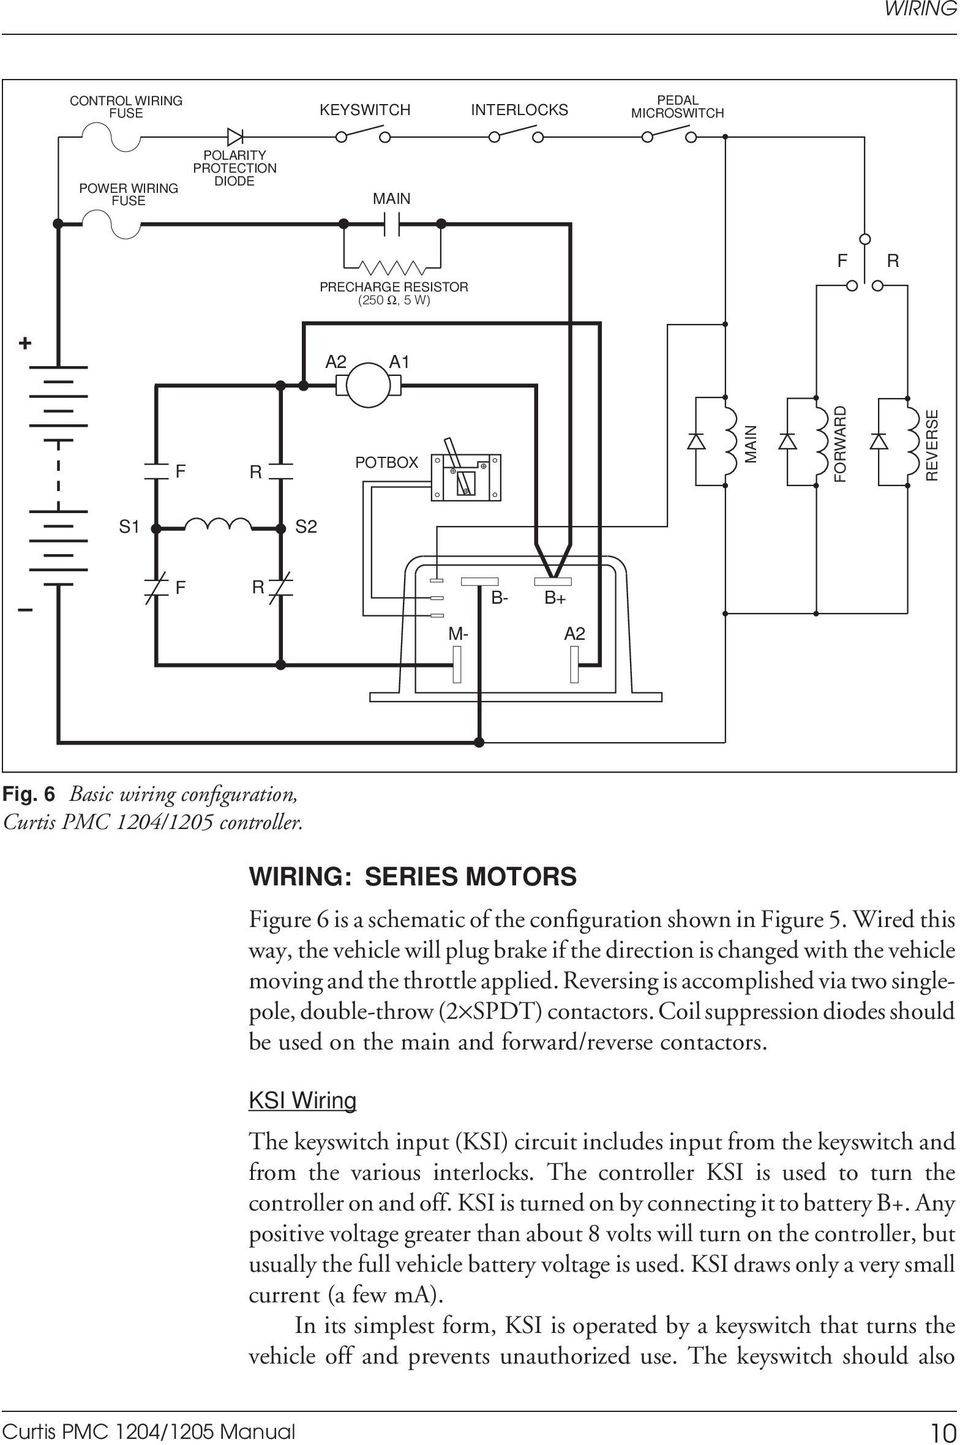 Manual 1204 5 motor controllers curtis pmc